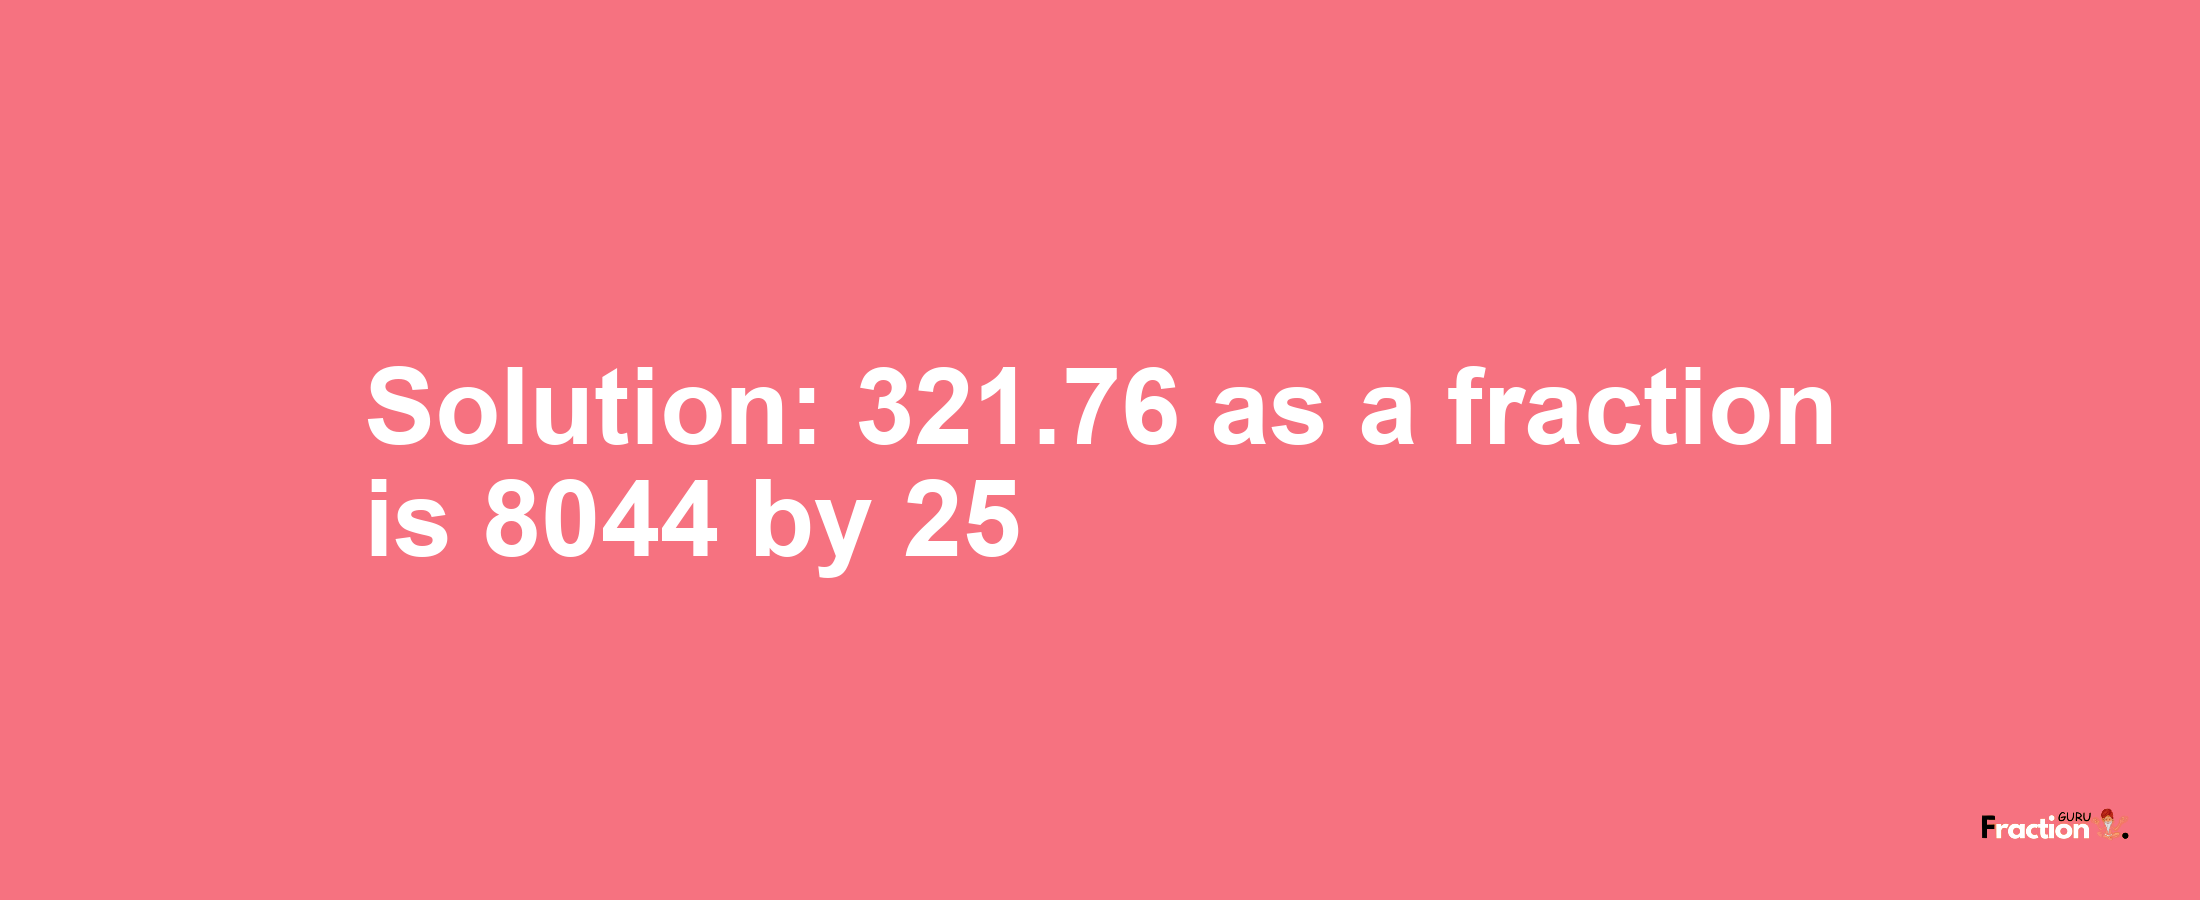 Solution:321.76 as a fraction is 8044/25